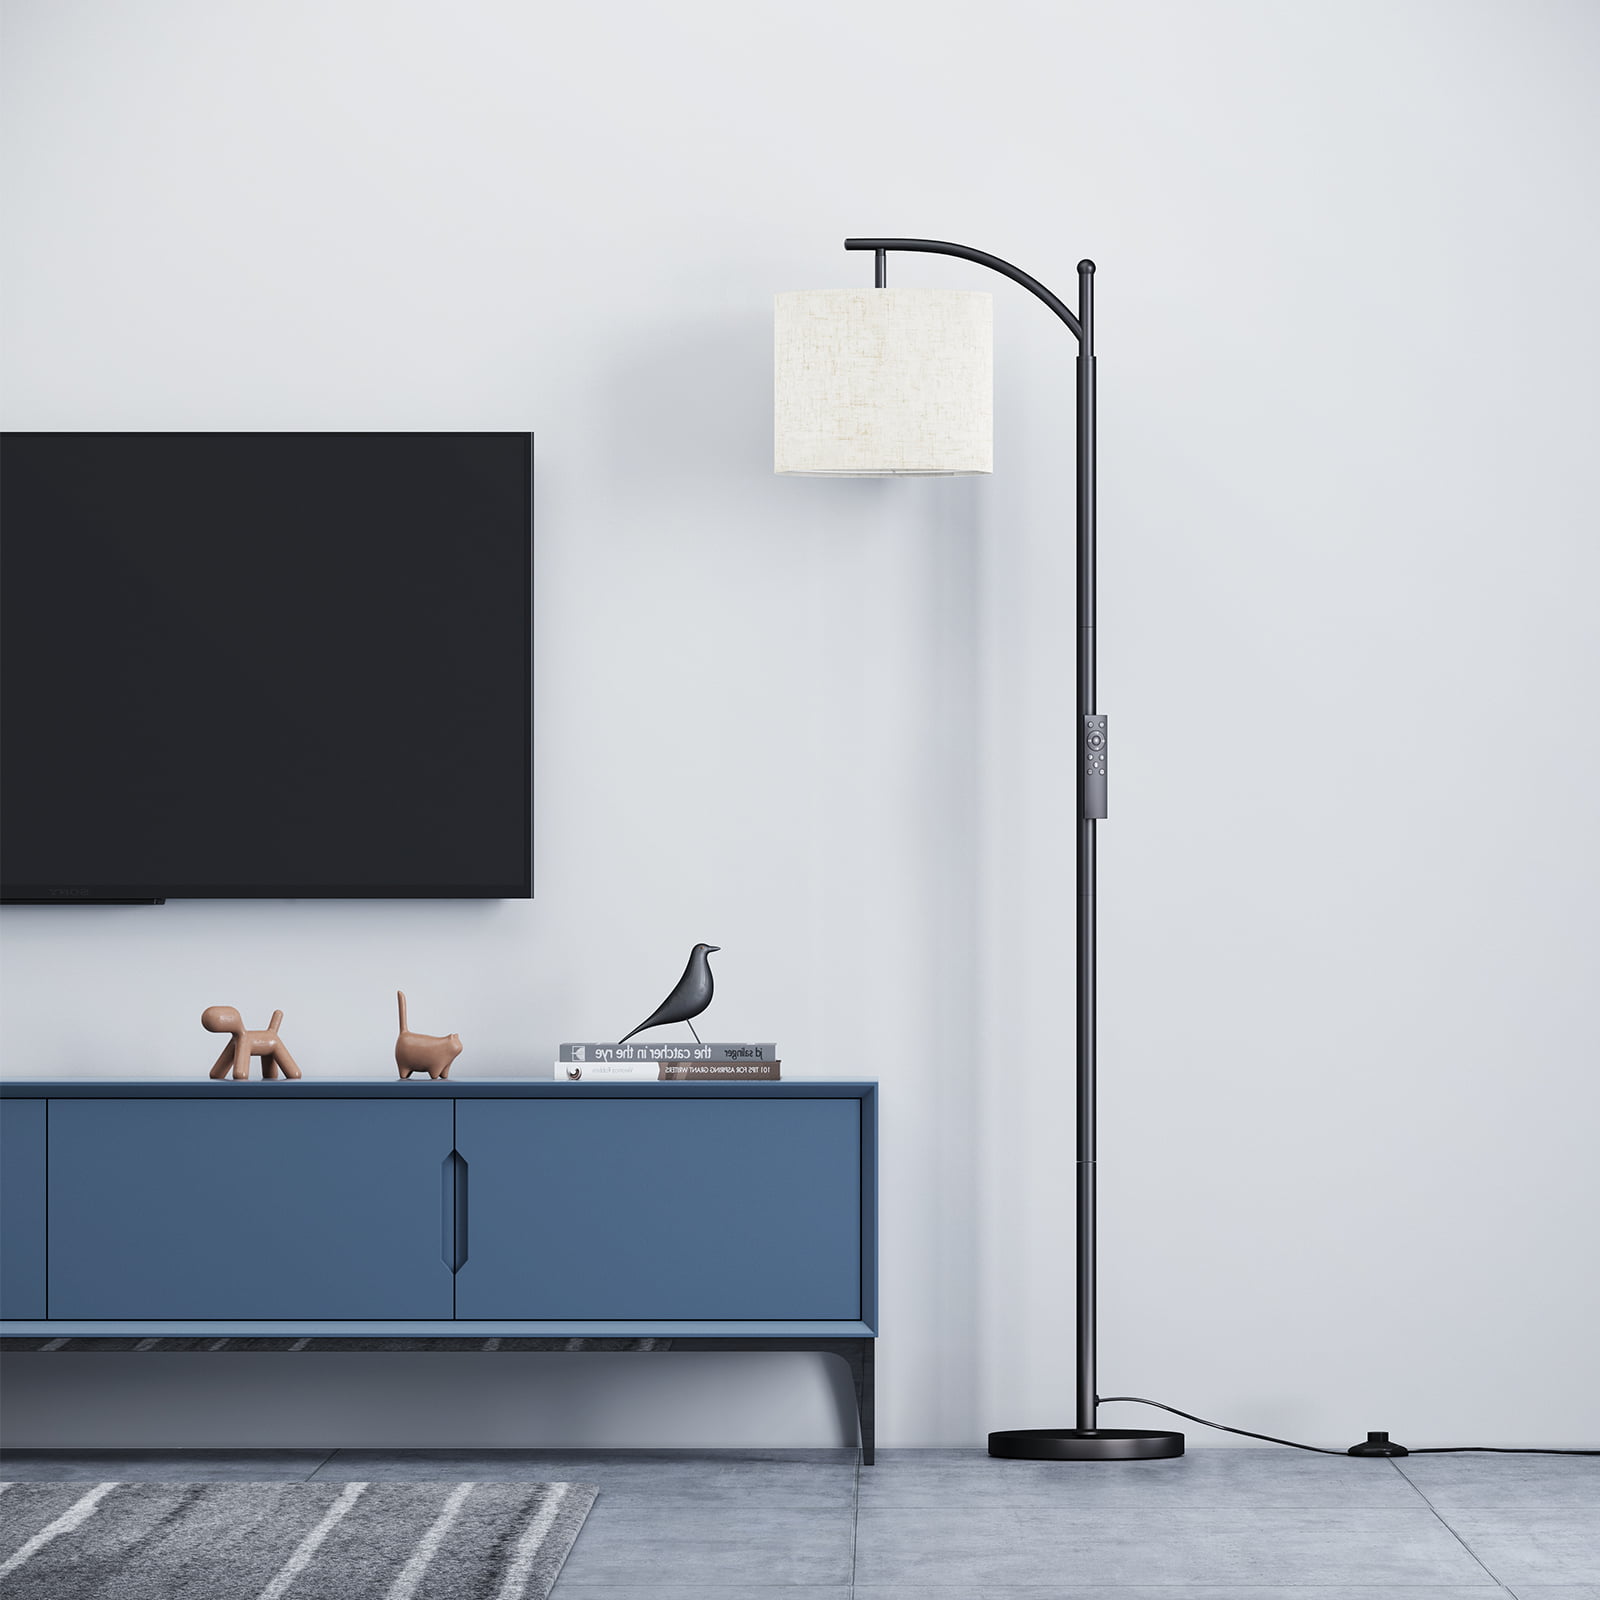 OUTON Arc LED Floor Lamp with Remote Control, Dimmable Modern Black 3 Light  Arched Tall Floor Lamp, …See more OUTON Arc LED Floor Lamp with Remote